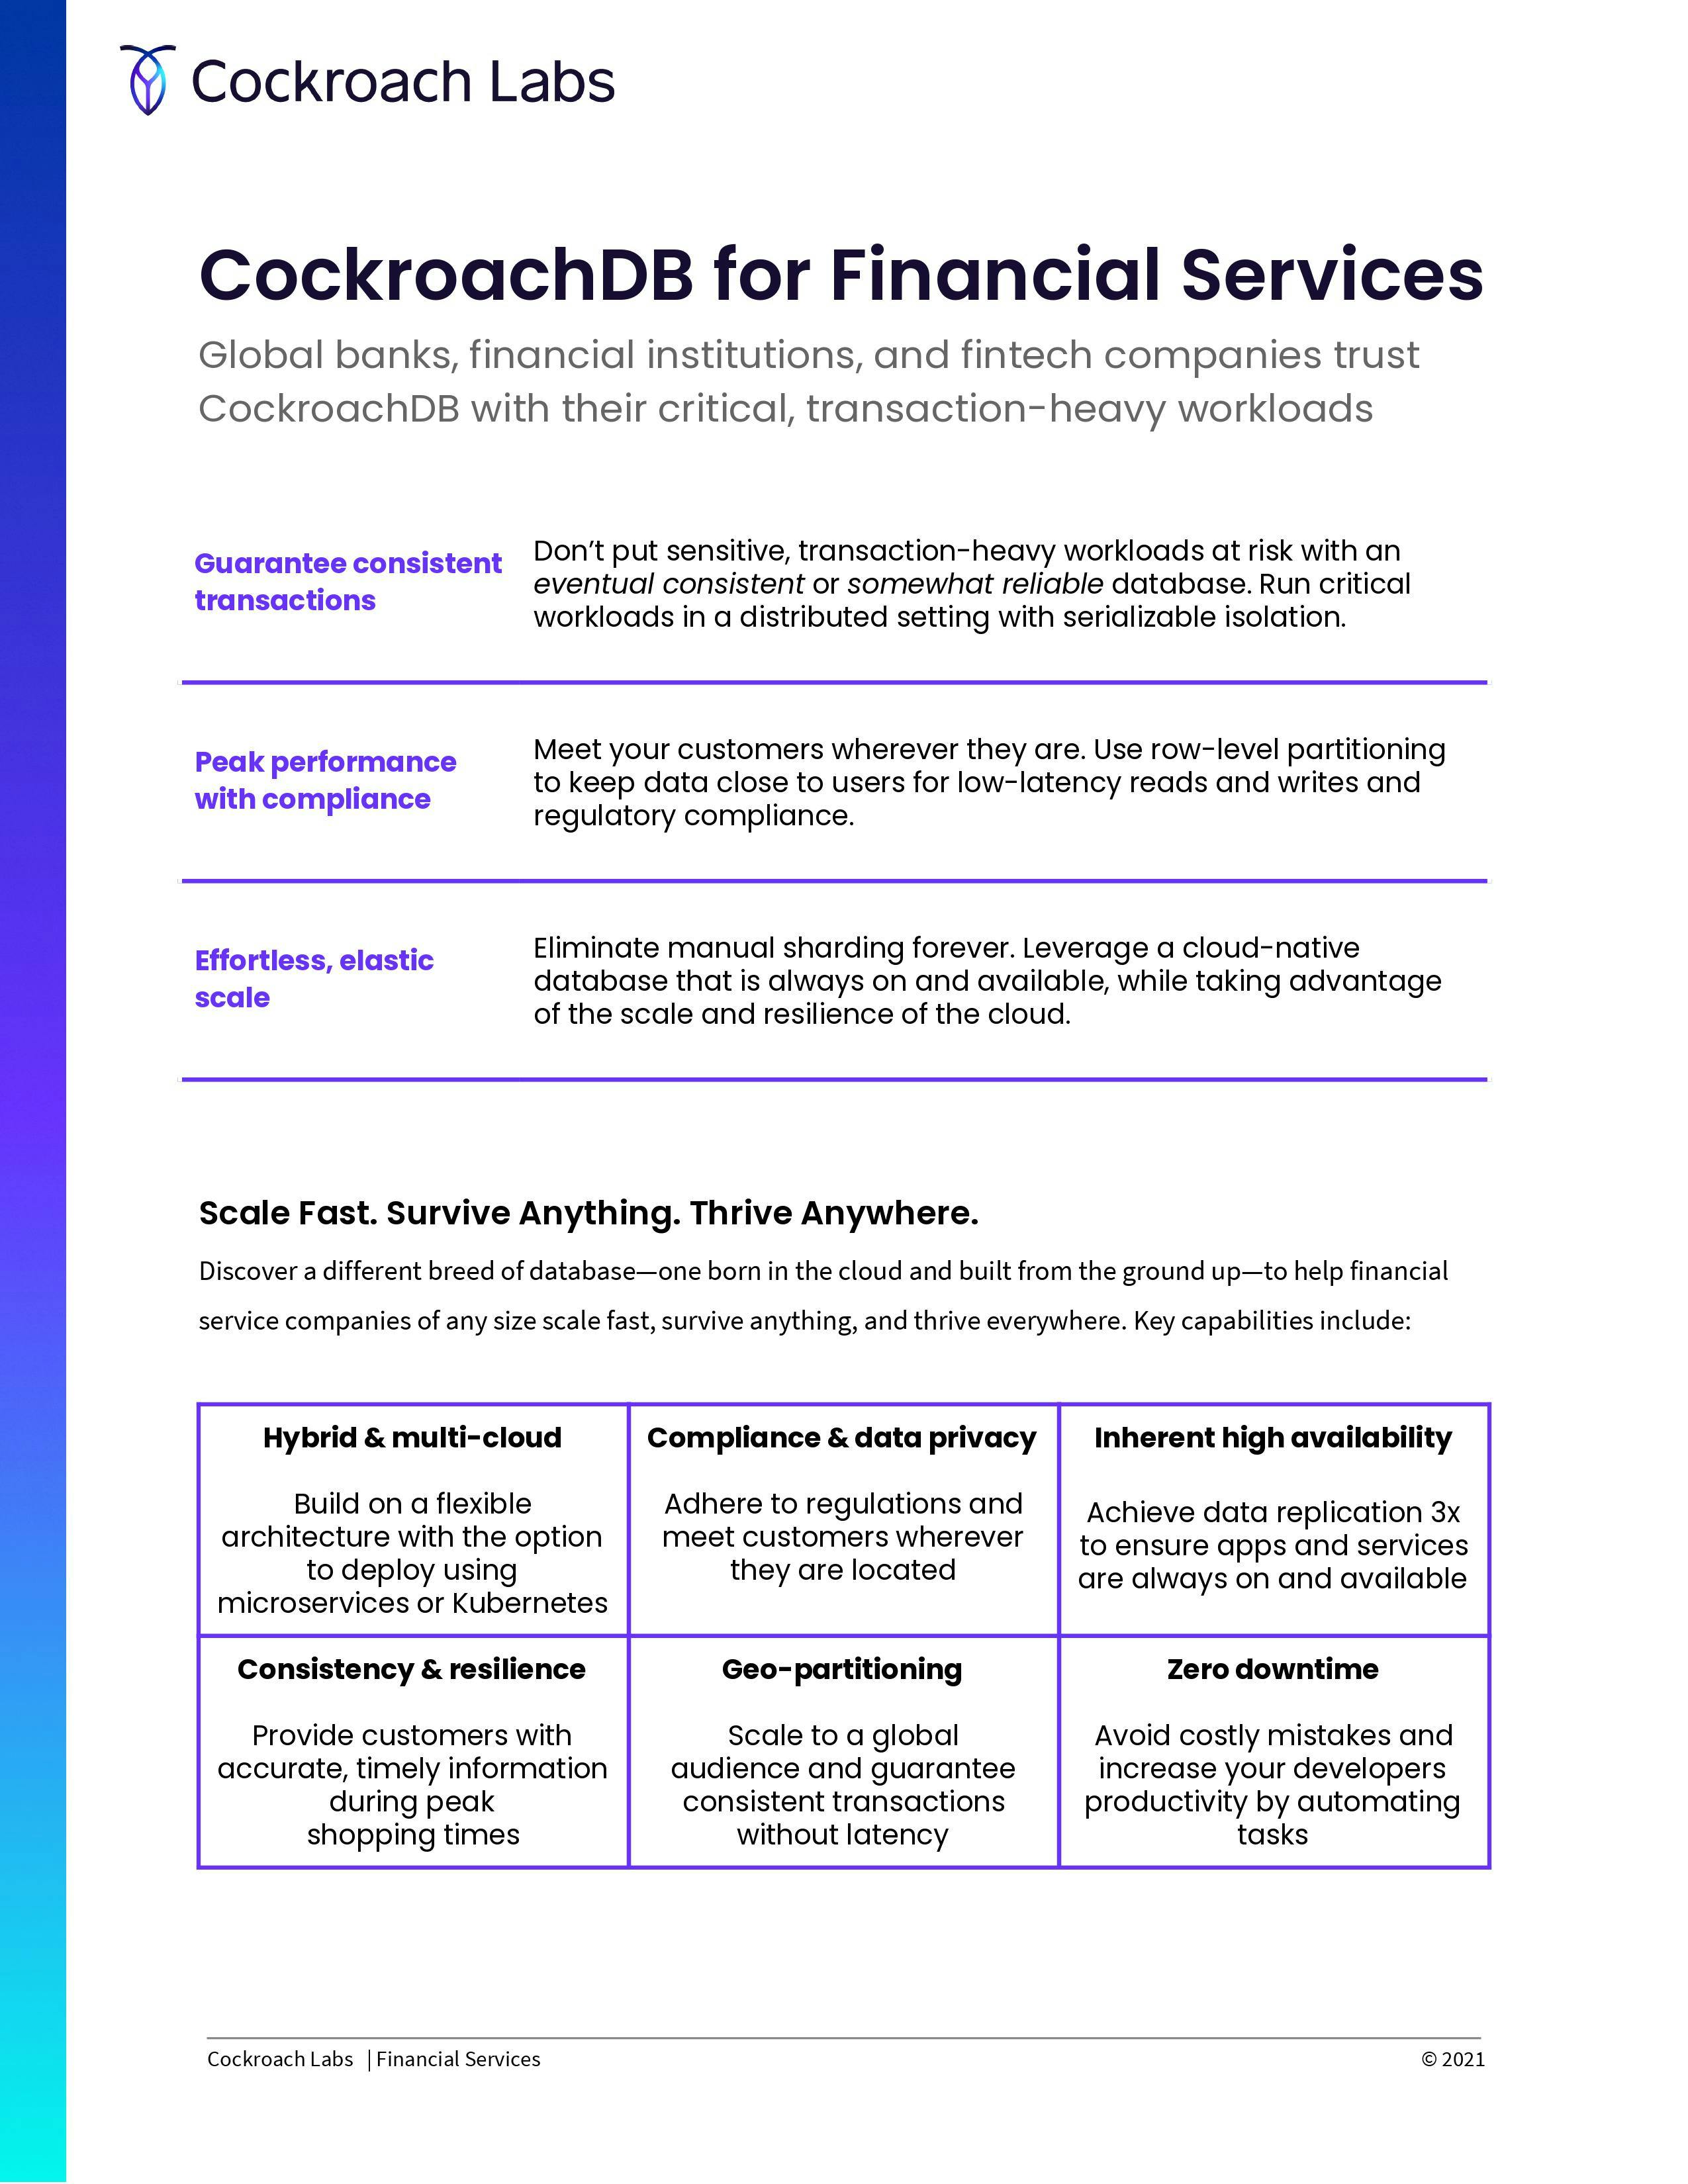 CockroachDB for Financial Services | Cockroach Labs